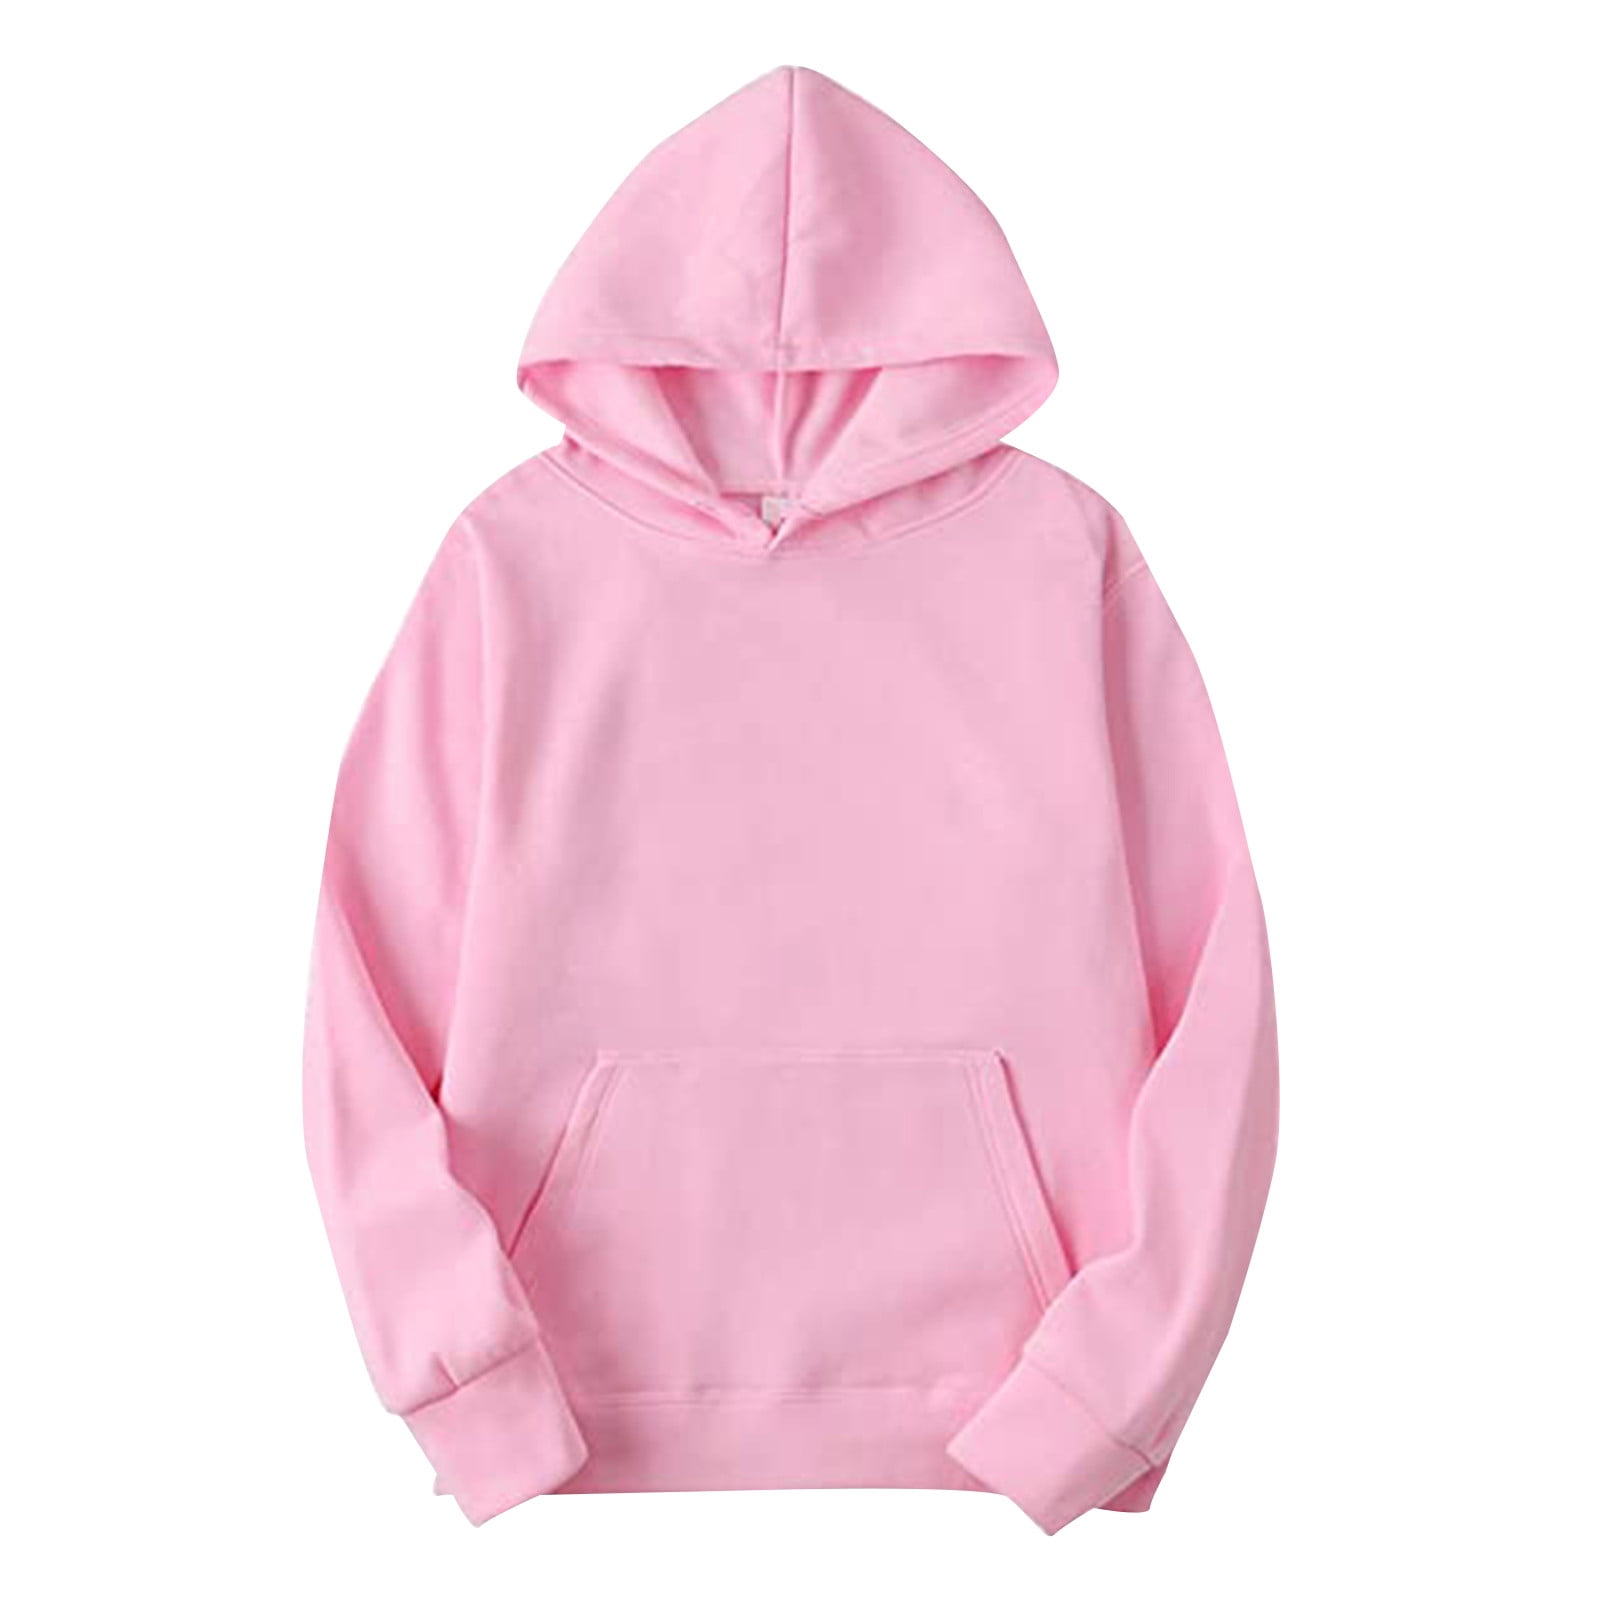 pink sweatshirts for men men and women blouse shirt autumn and winter  leisure hooded sweater solid color sweater soft top blouse